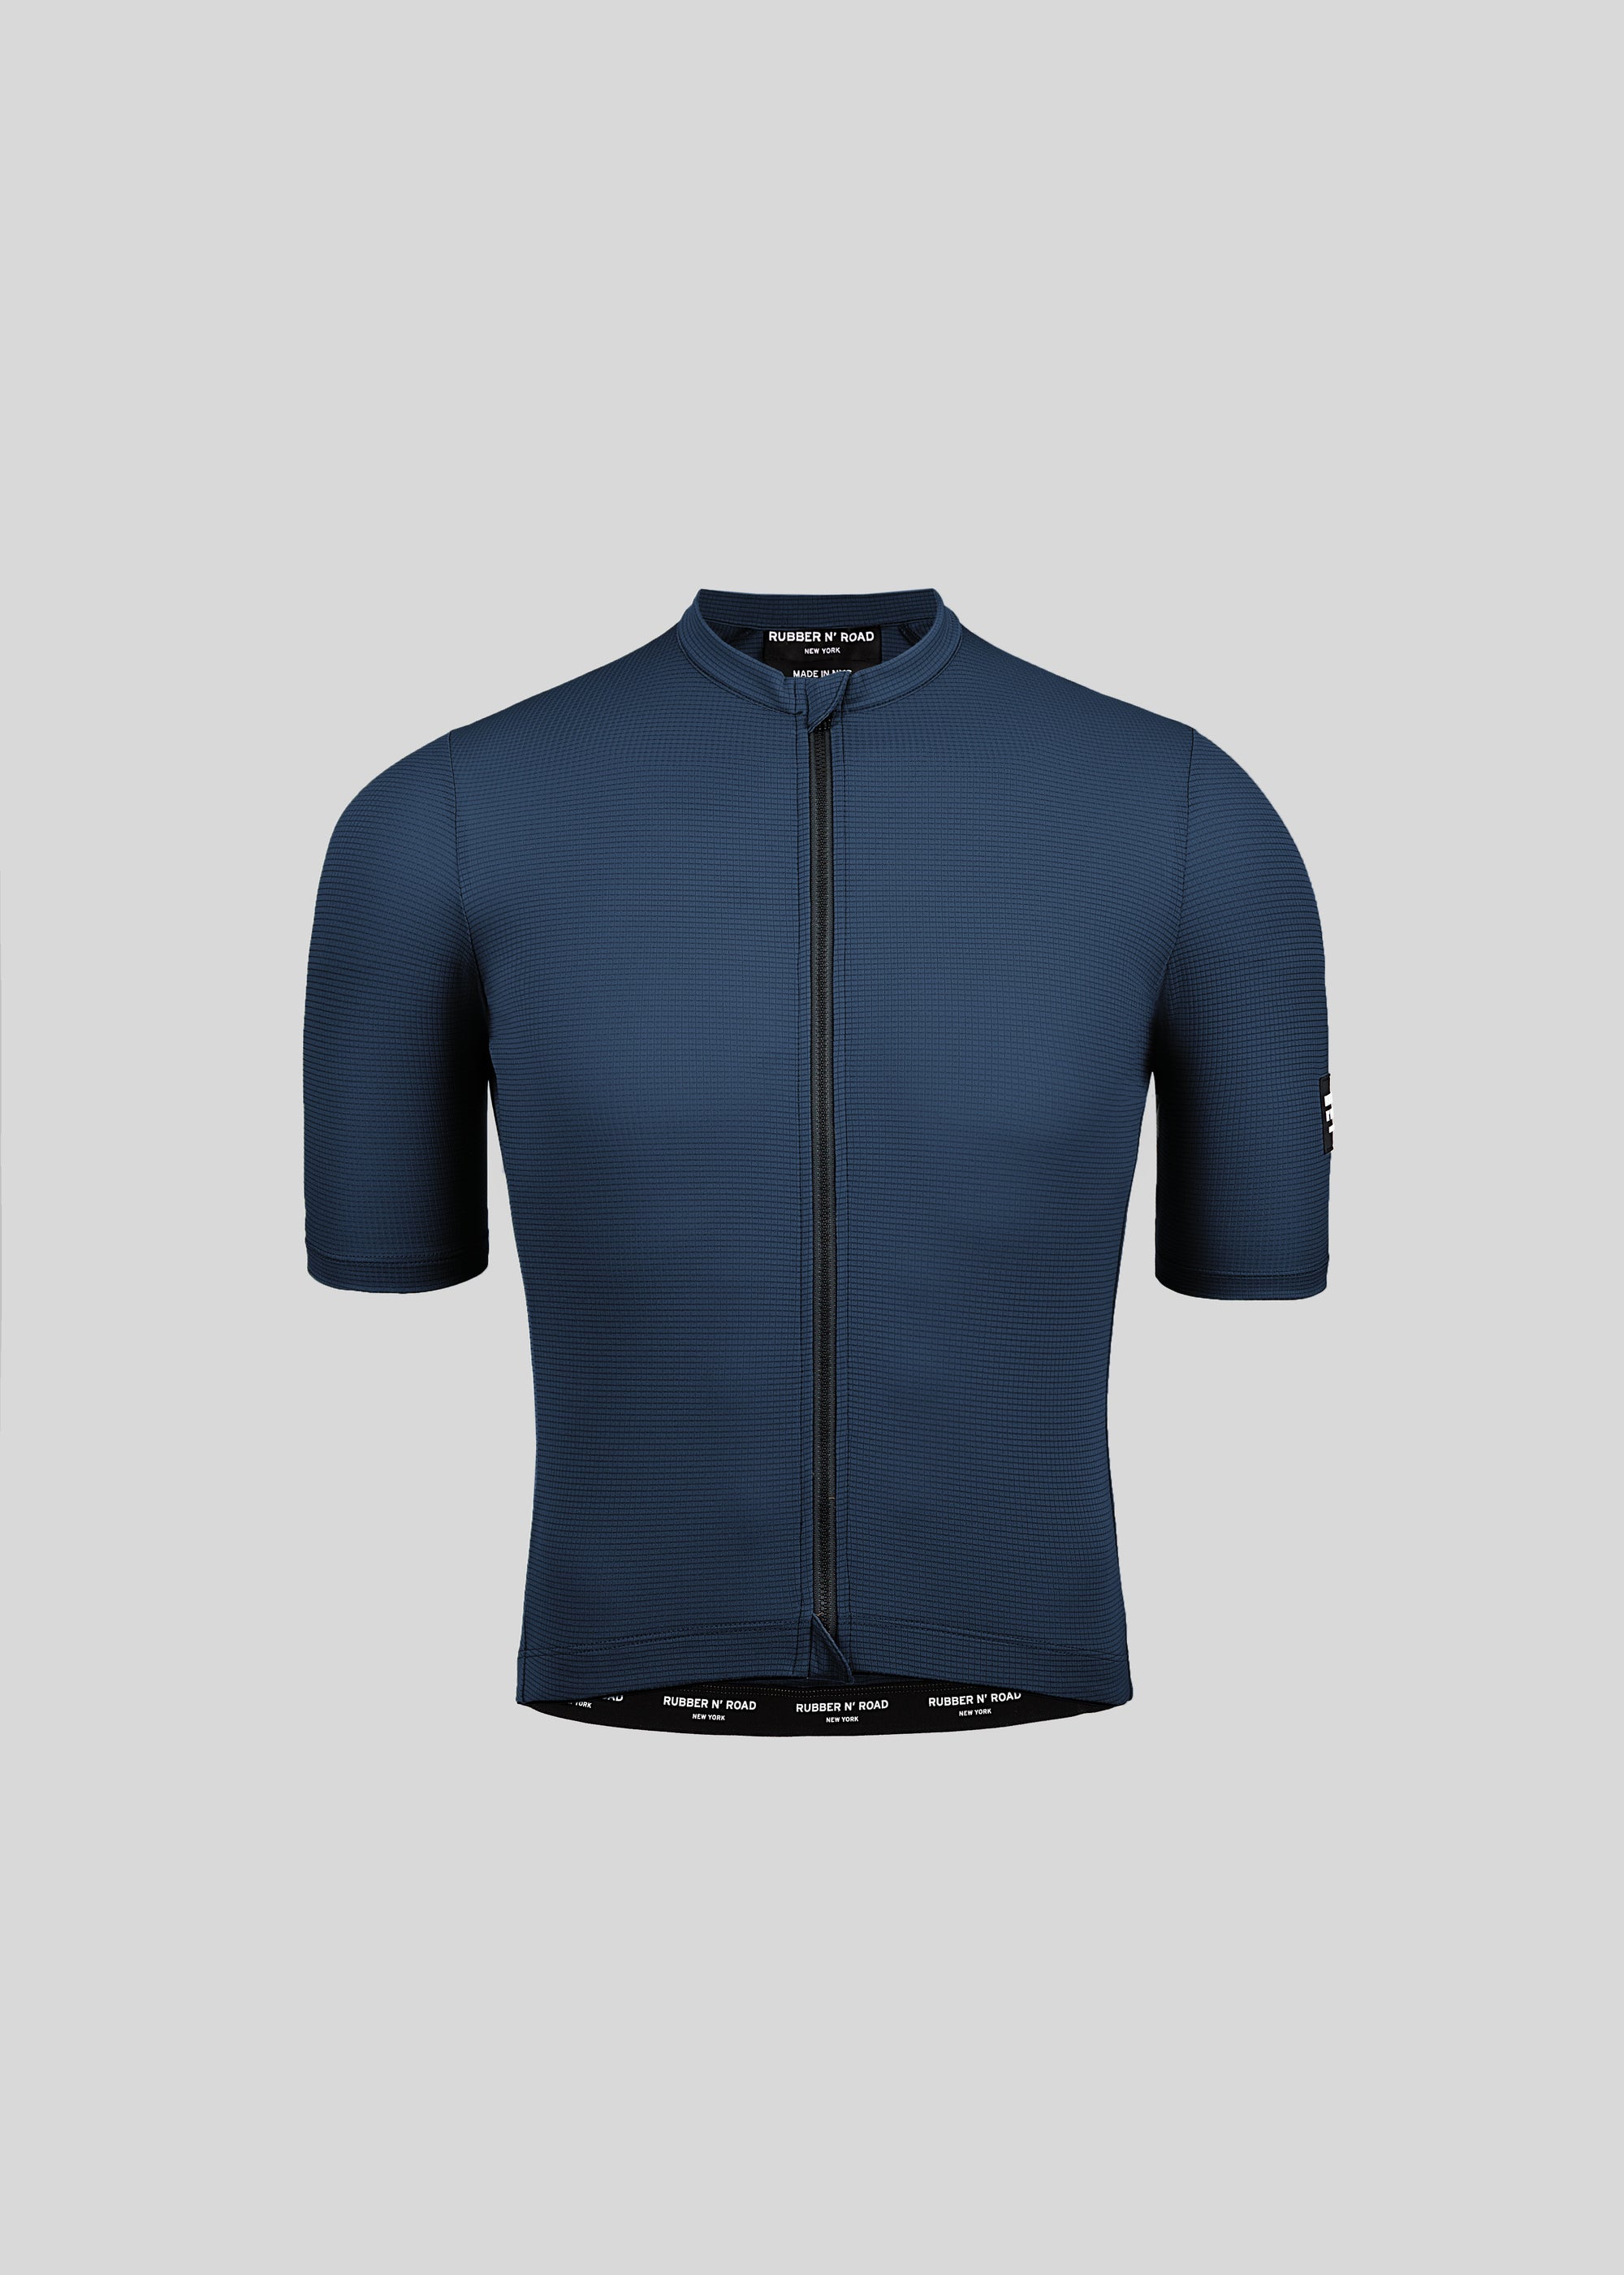 Control - High Humidity Jersey